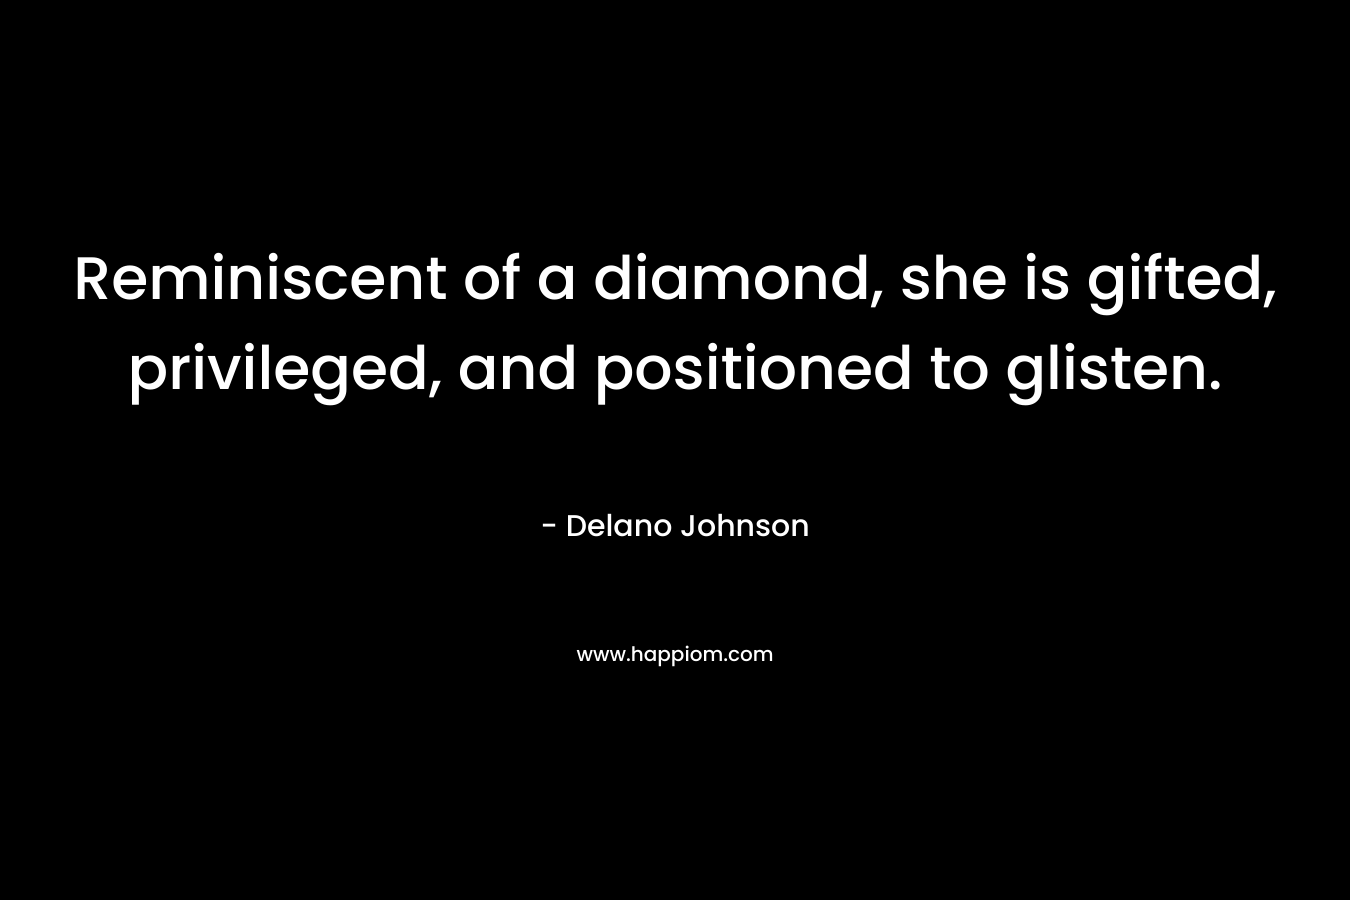 Reminiscent of a diamond, she is gifted, privileged, and positioned to glisten.